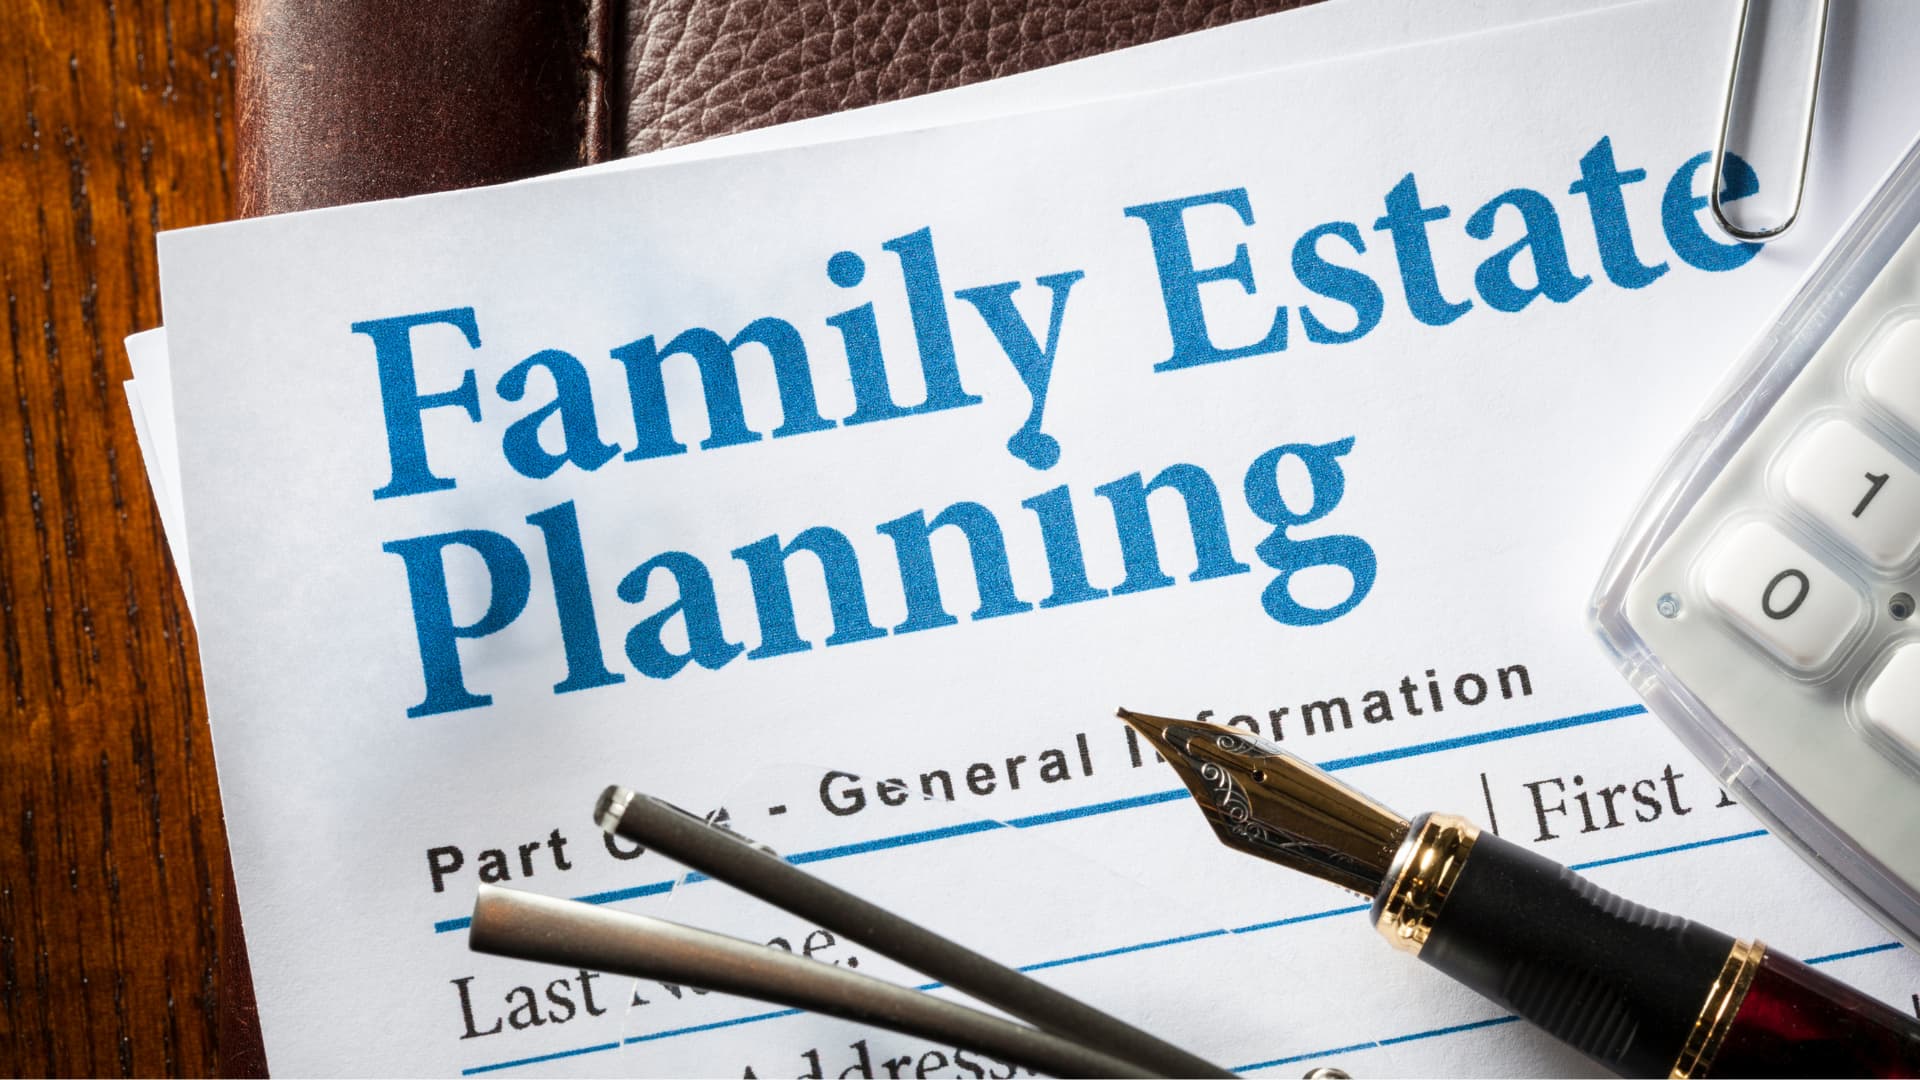 An image illustrating Family Estate Planning on a estate planning document.